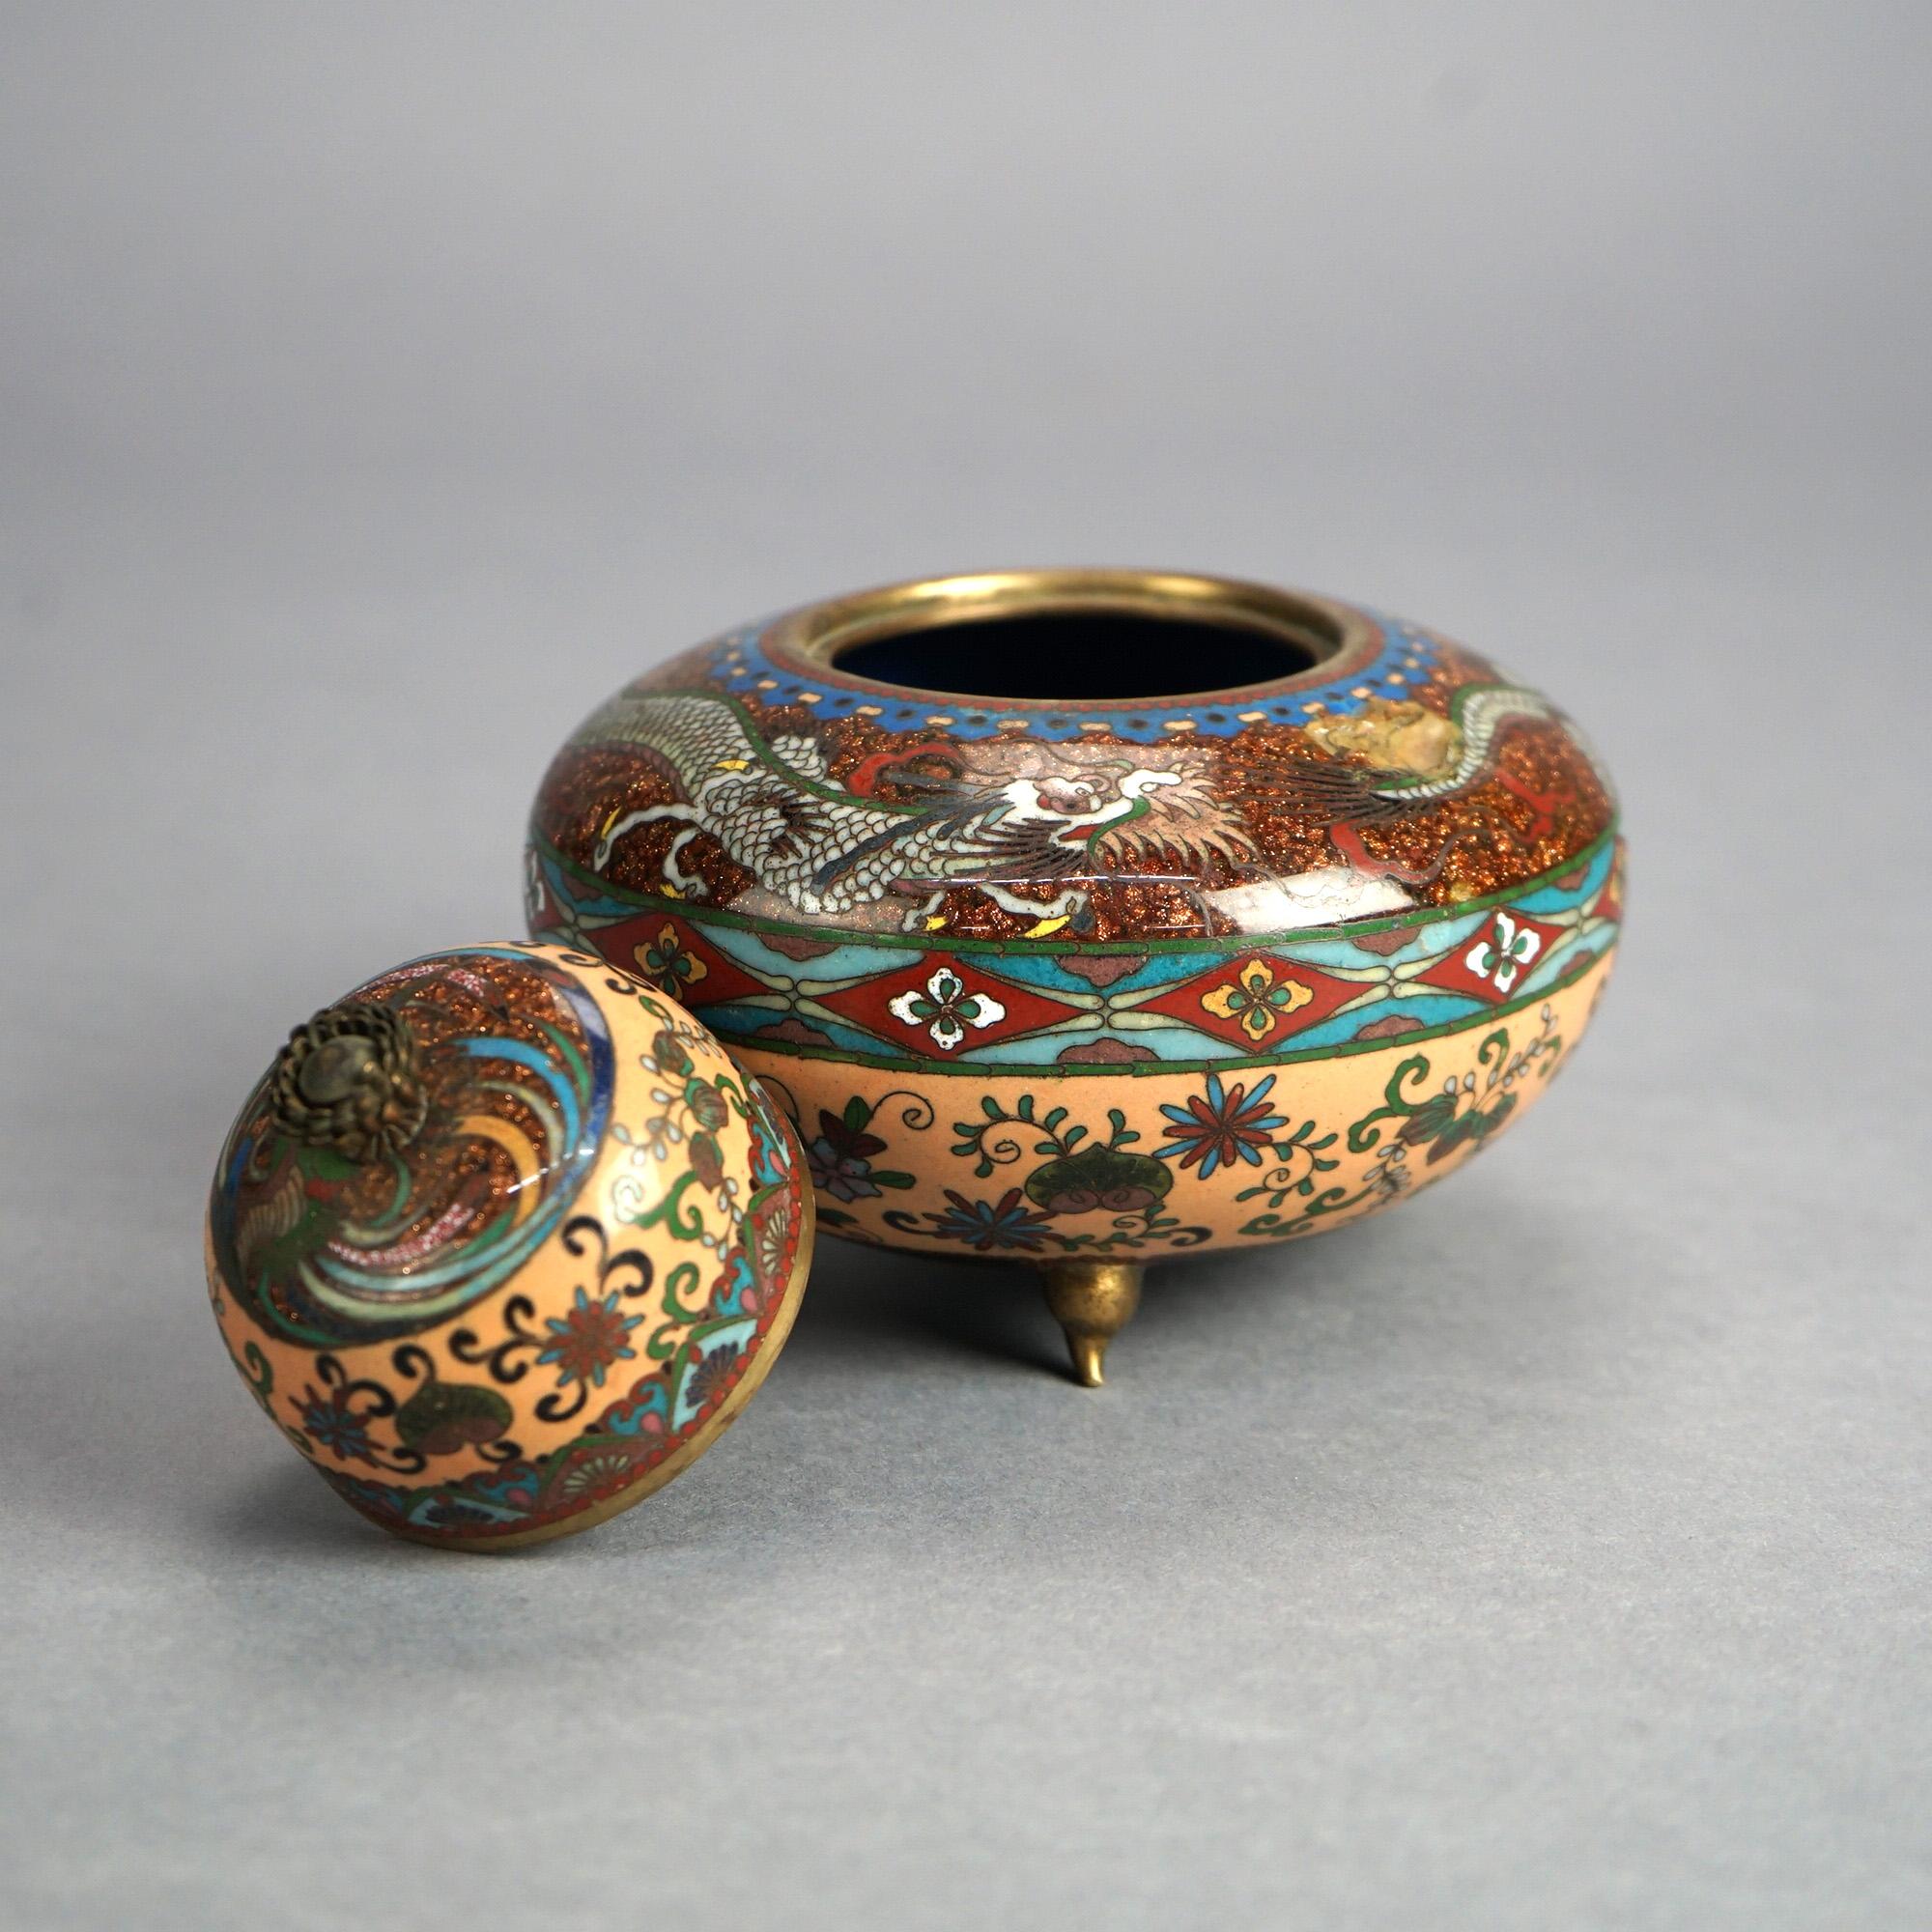 Antique Japanese Meiji Cloisonné Enameled, Footed & Lidded Scent Jar with Dragon and Flowers C1920

Measures- 5''H x 5.25''W x 5.25''D